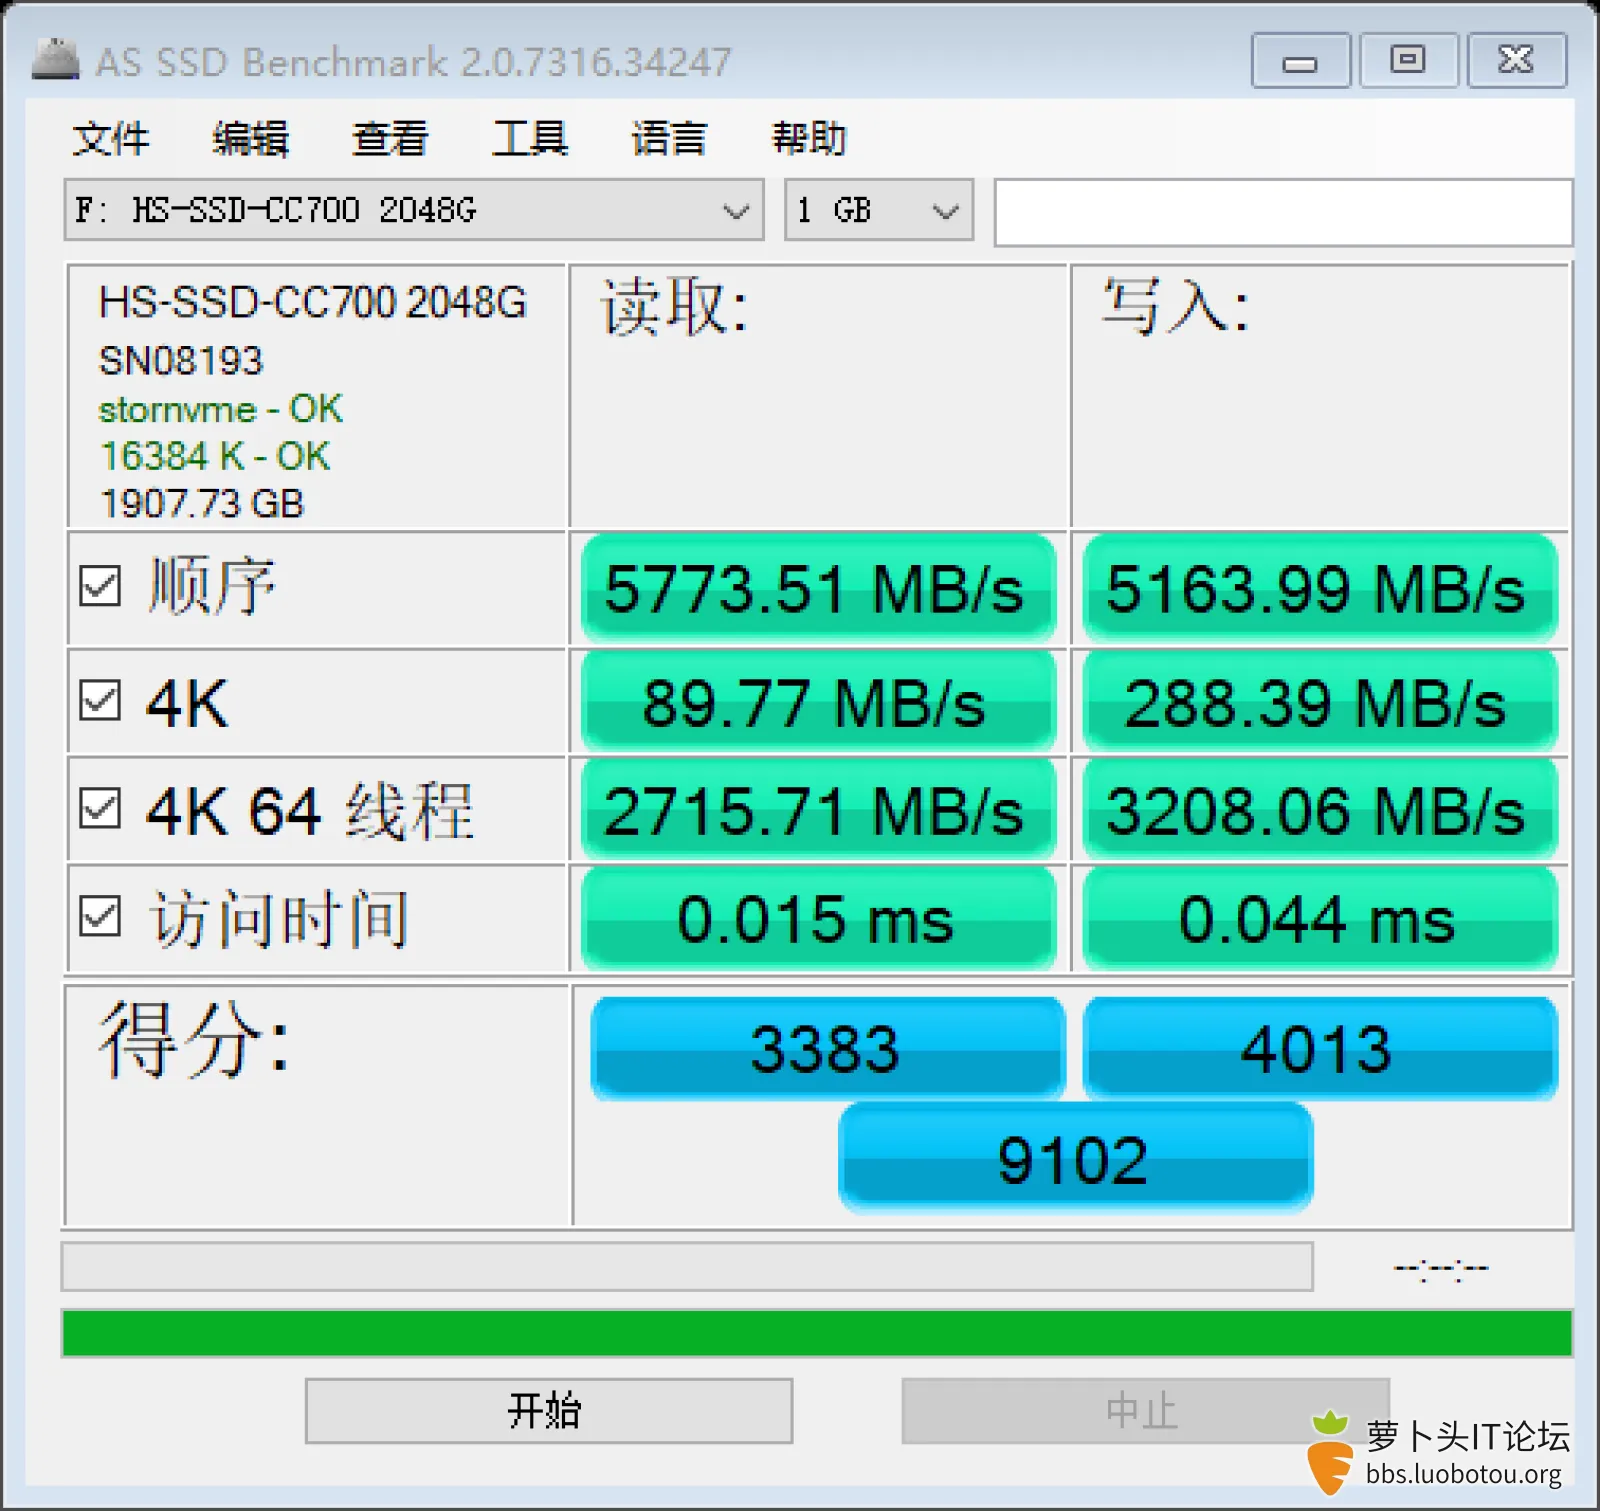 as-ssd-bench HS-SSD-CC700 204 2023.1.12 10-08-35.png